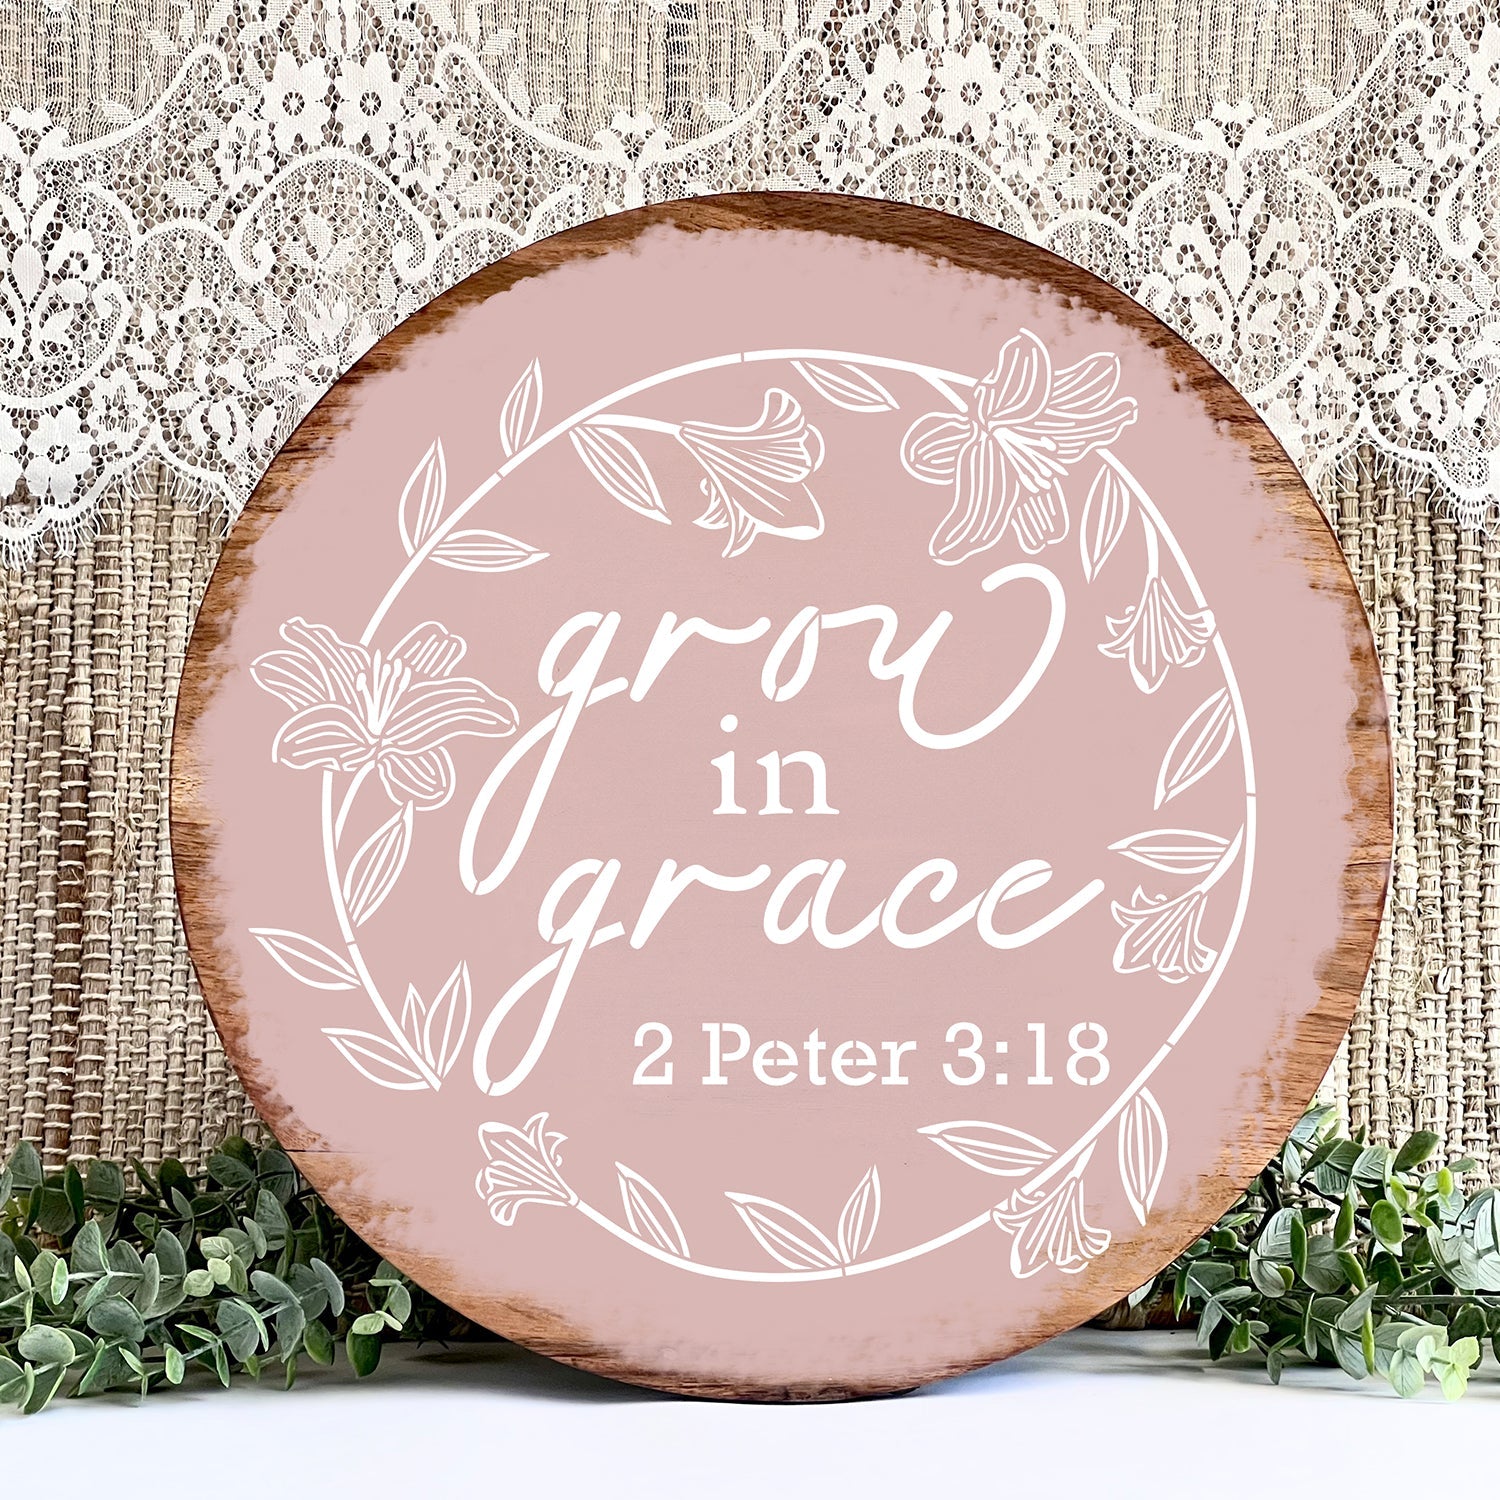 DIY reusable Christian faith scripture wood sign stencil, Grow in grace 2 Peter 3:18,  consider how the wildflowers grow -Luke 12:27, christian home decor, arts and crafts, upcycling, bible verse wall art, scripture sign reusable stencil, Spring and Easter  stencils, Lillies